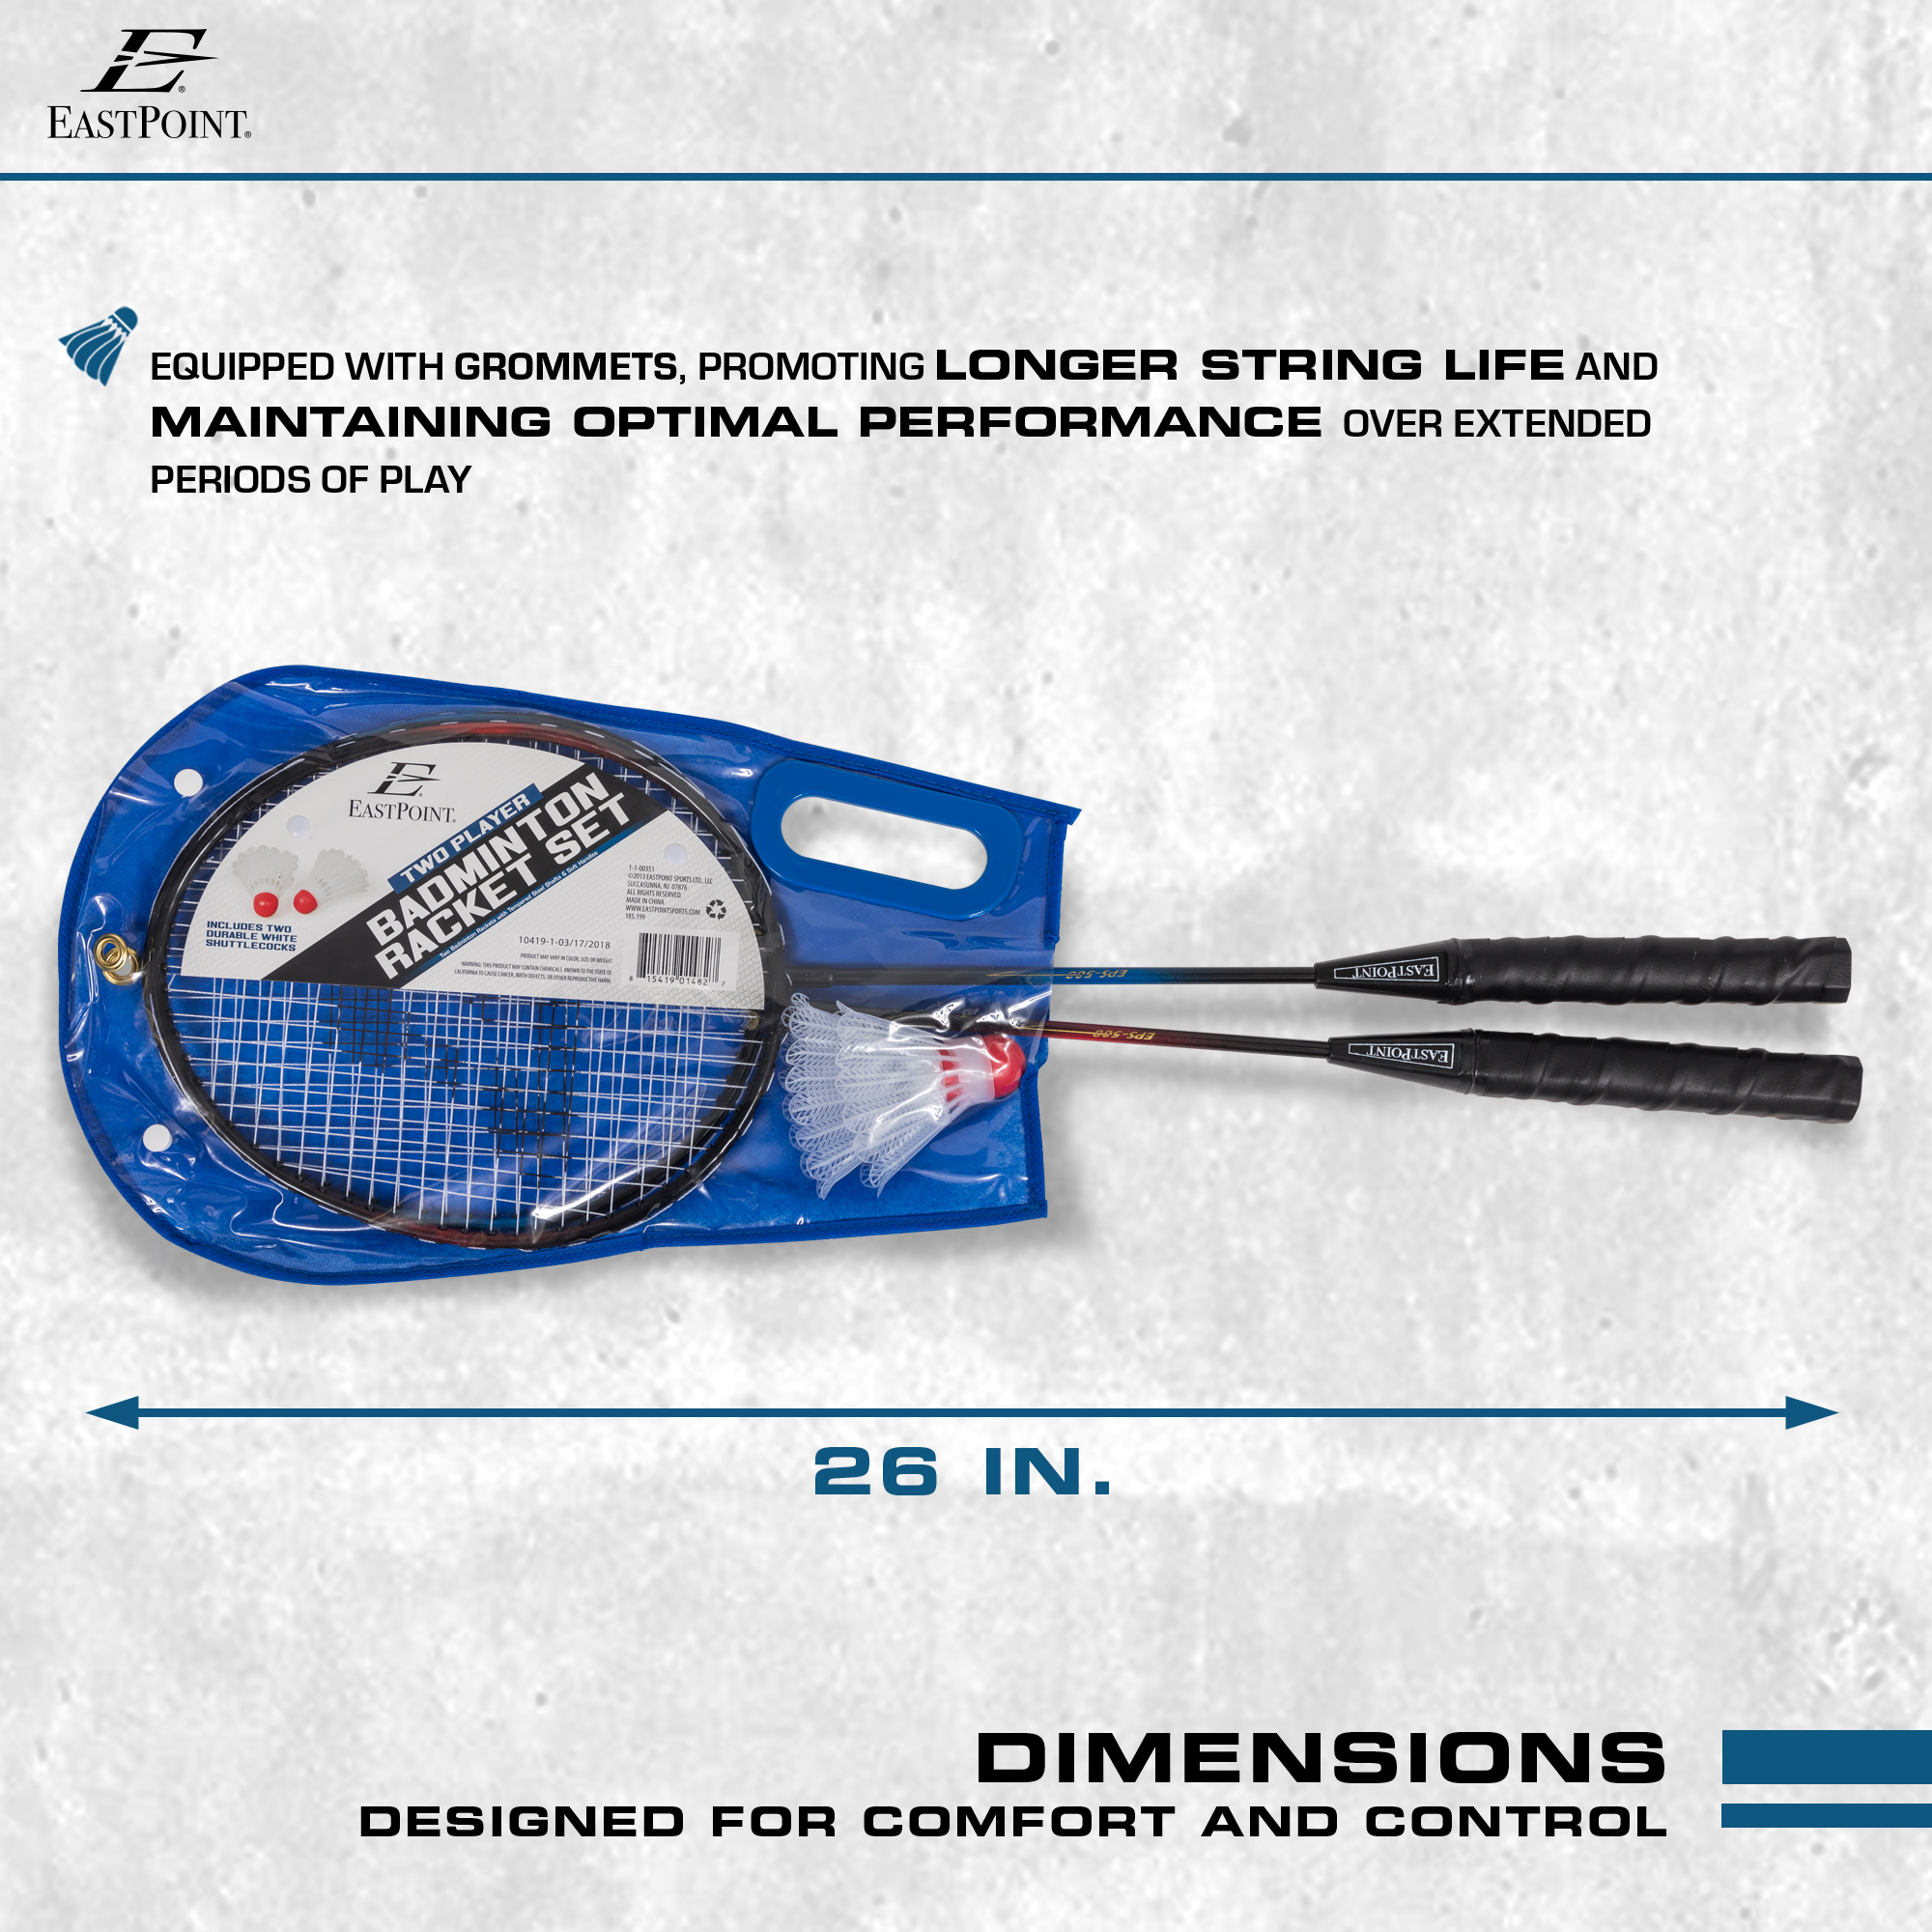 EastPoint Sports 2 Player Badminton Racket Set; Contains 2 Rackets with Tempered Steel Shafts, Comfort Handles and 2 Durable, White Shuttlecock Birdies - image 4 of 7